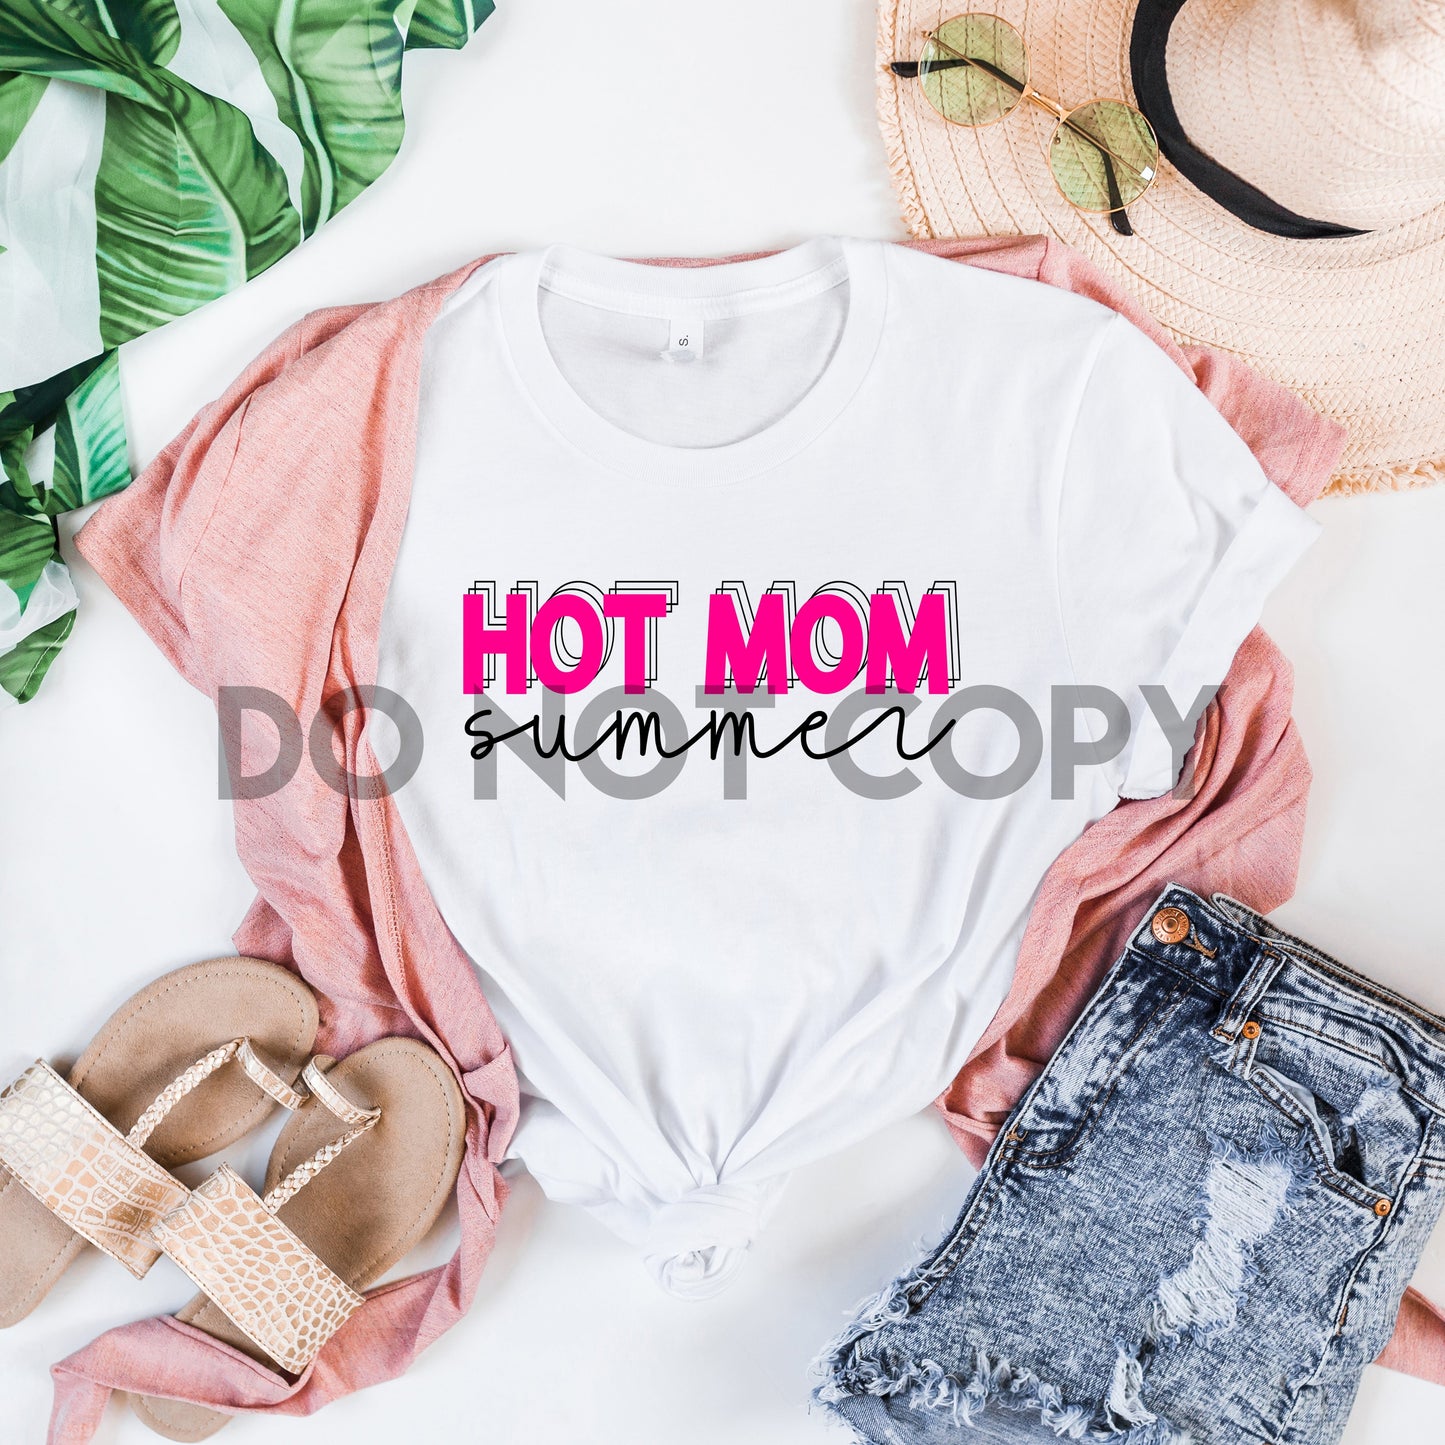 Hot Mom Summer Pink Dream Print or Sublimation Print